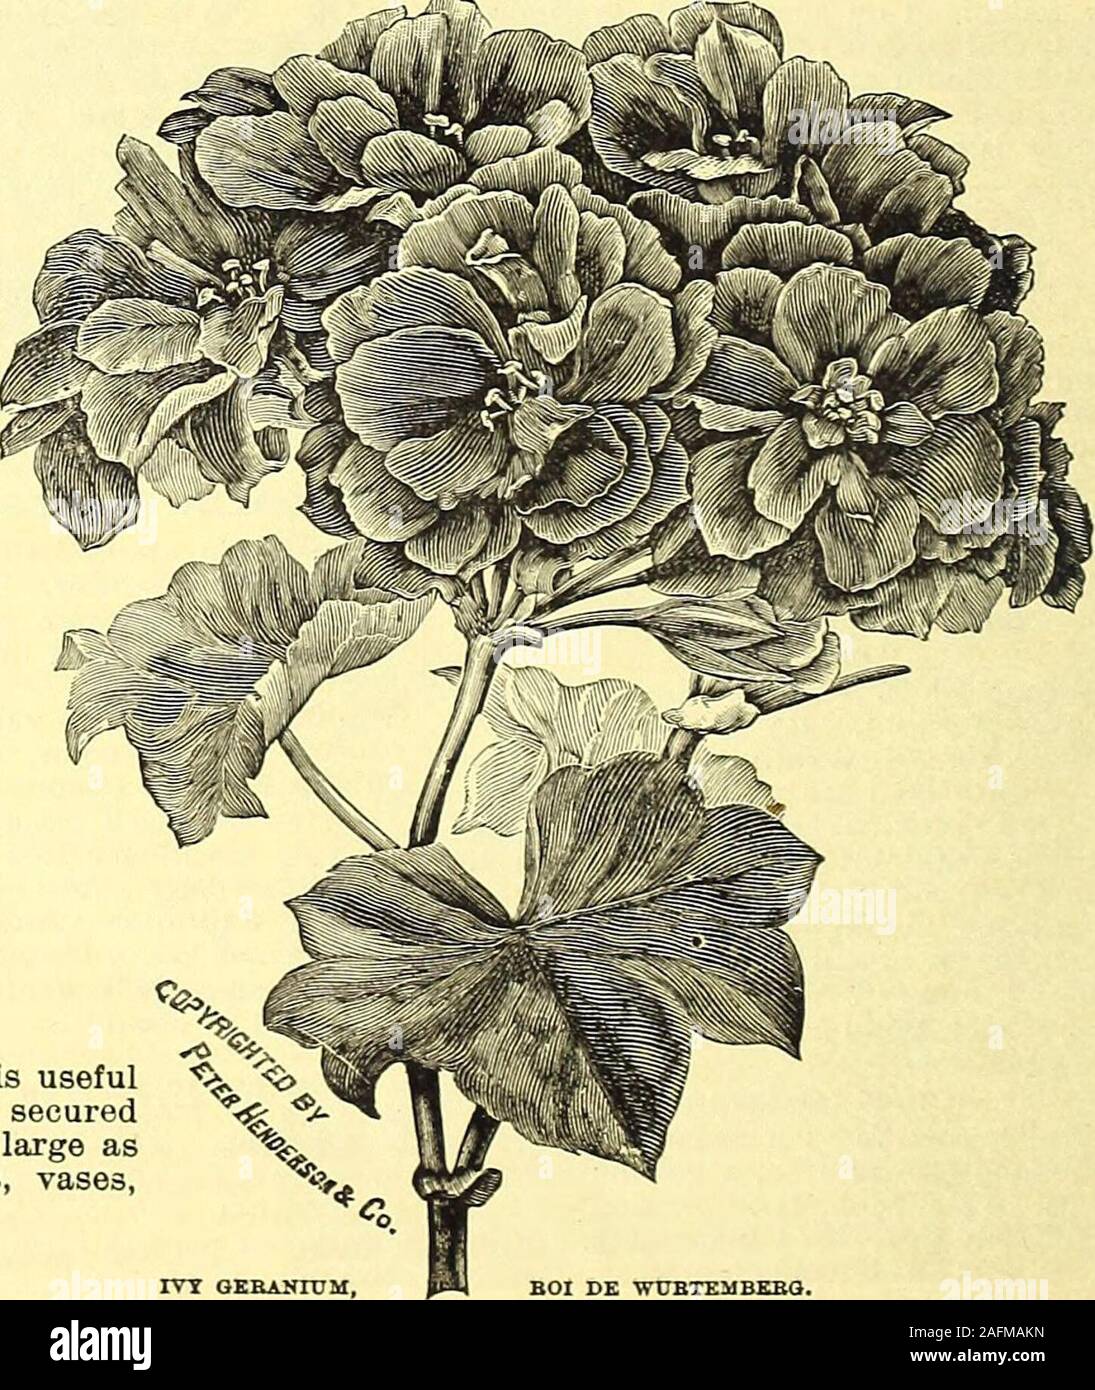 . Manual of everything for the garden : 1894. ed lilac.Ernesto Bach. Cherry red, upper petals marked scarlet. Ernest Reyer. A rich rose color; a strong grower, free bloomer and a good variety in every respect. Ingenieur Parlier. Very large umbels, florets of immense size; currant color shaded violet; upper petals orange red. La Fondre. Another excellent variety; deep, bright, rich scarlet.M. de Fortanier. Large trusses, large roundflorets, currant red shaded violet, centre markedorange.Mme. Chantrier. Plant short-jointed and free,enormous sized trusses of fine form, red with solferino shadings Stock Photo